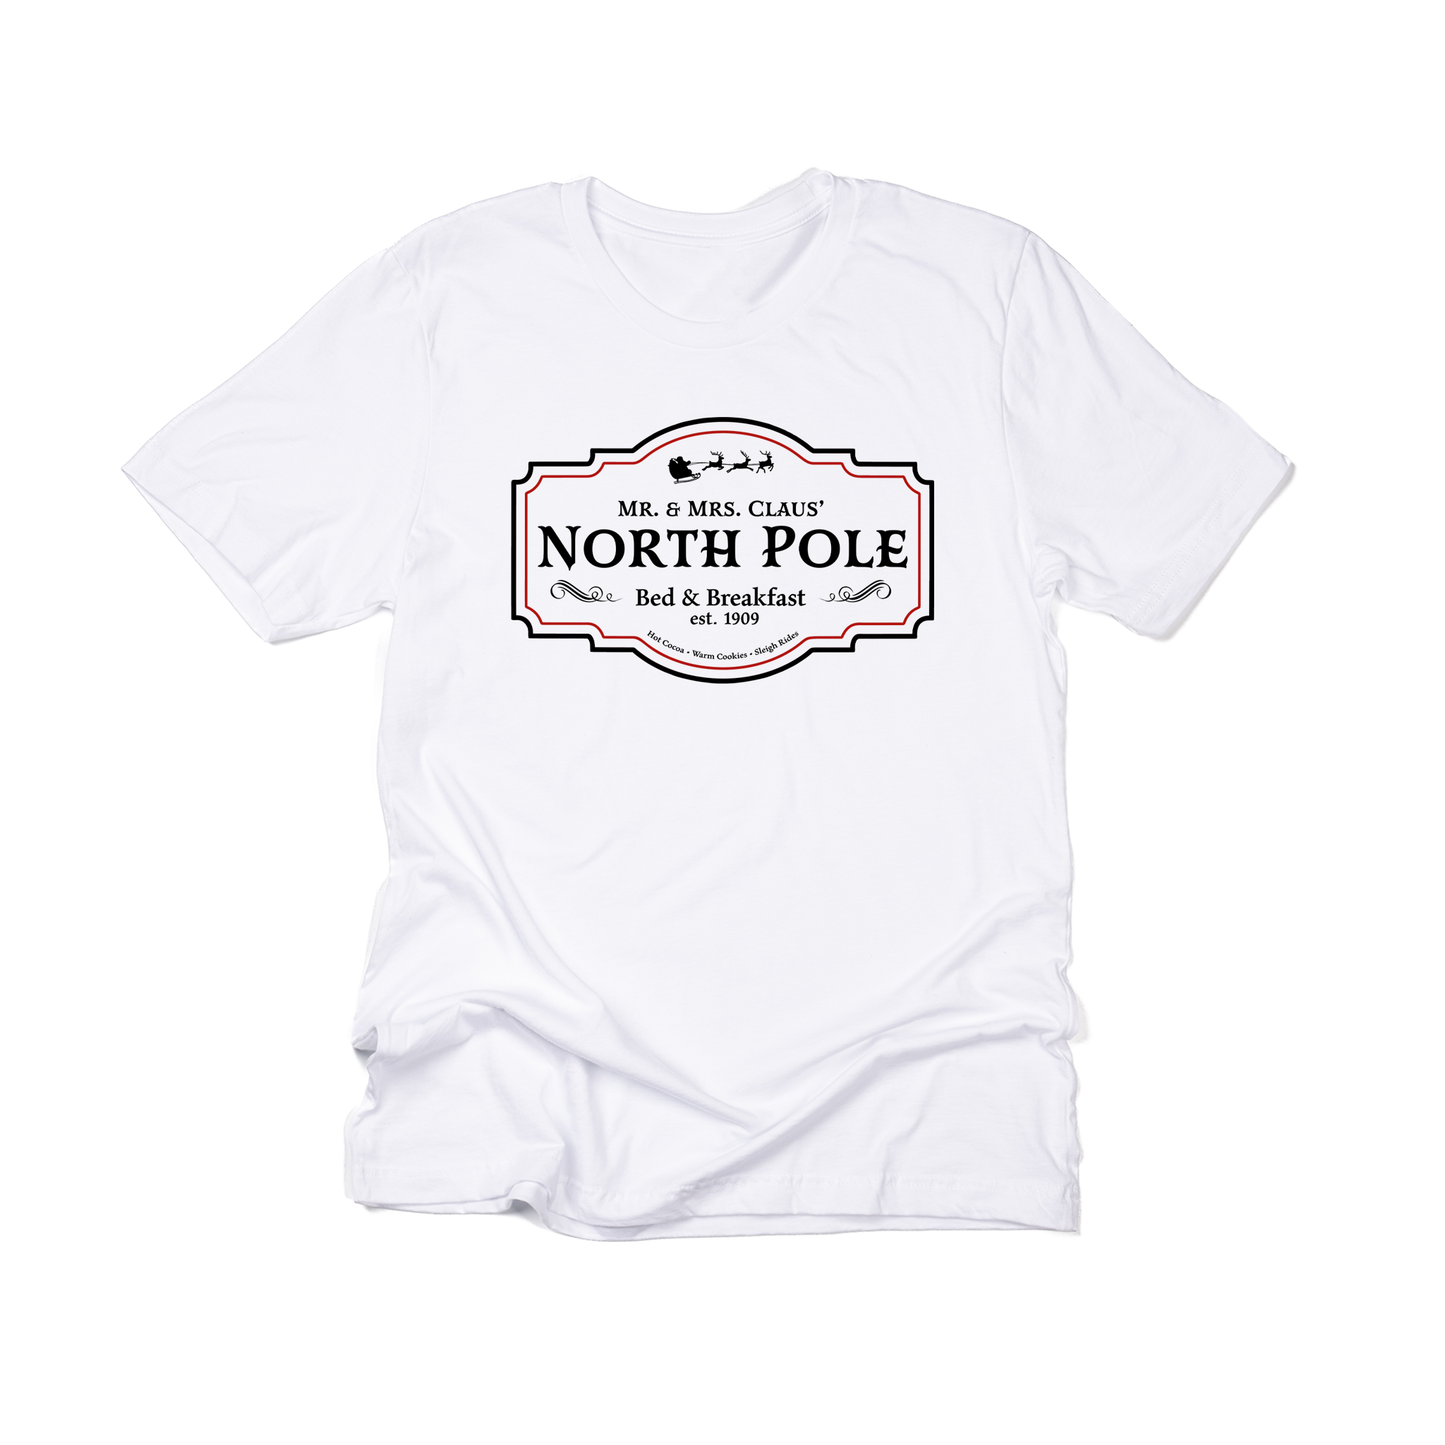 North Pole Bed & Breakfast - Tee (White)